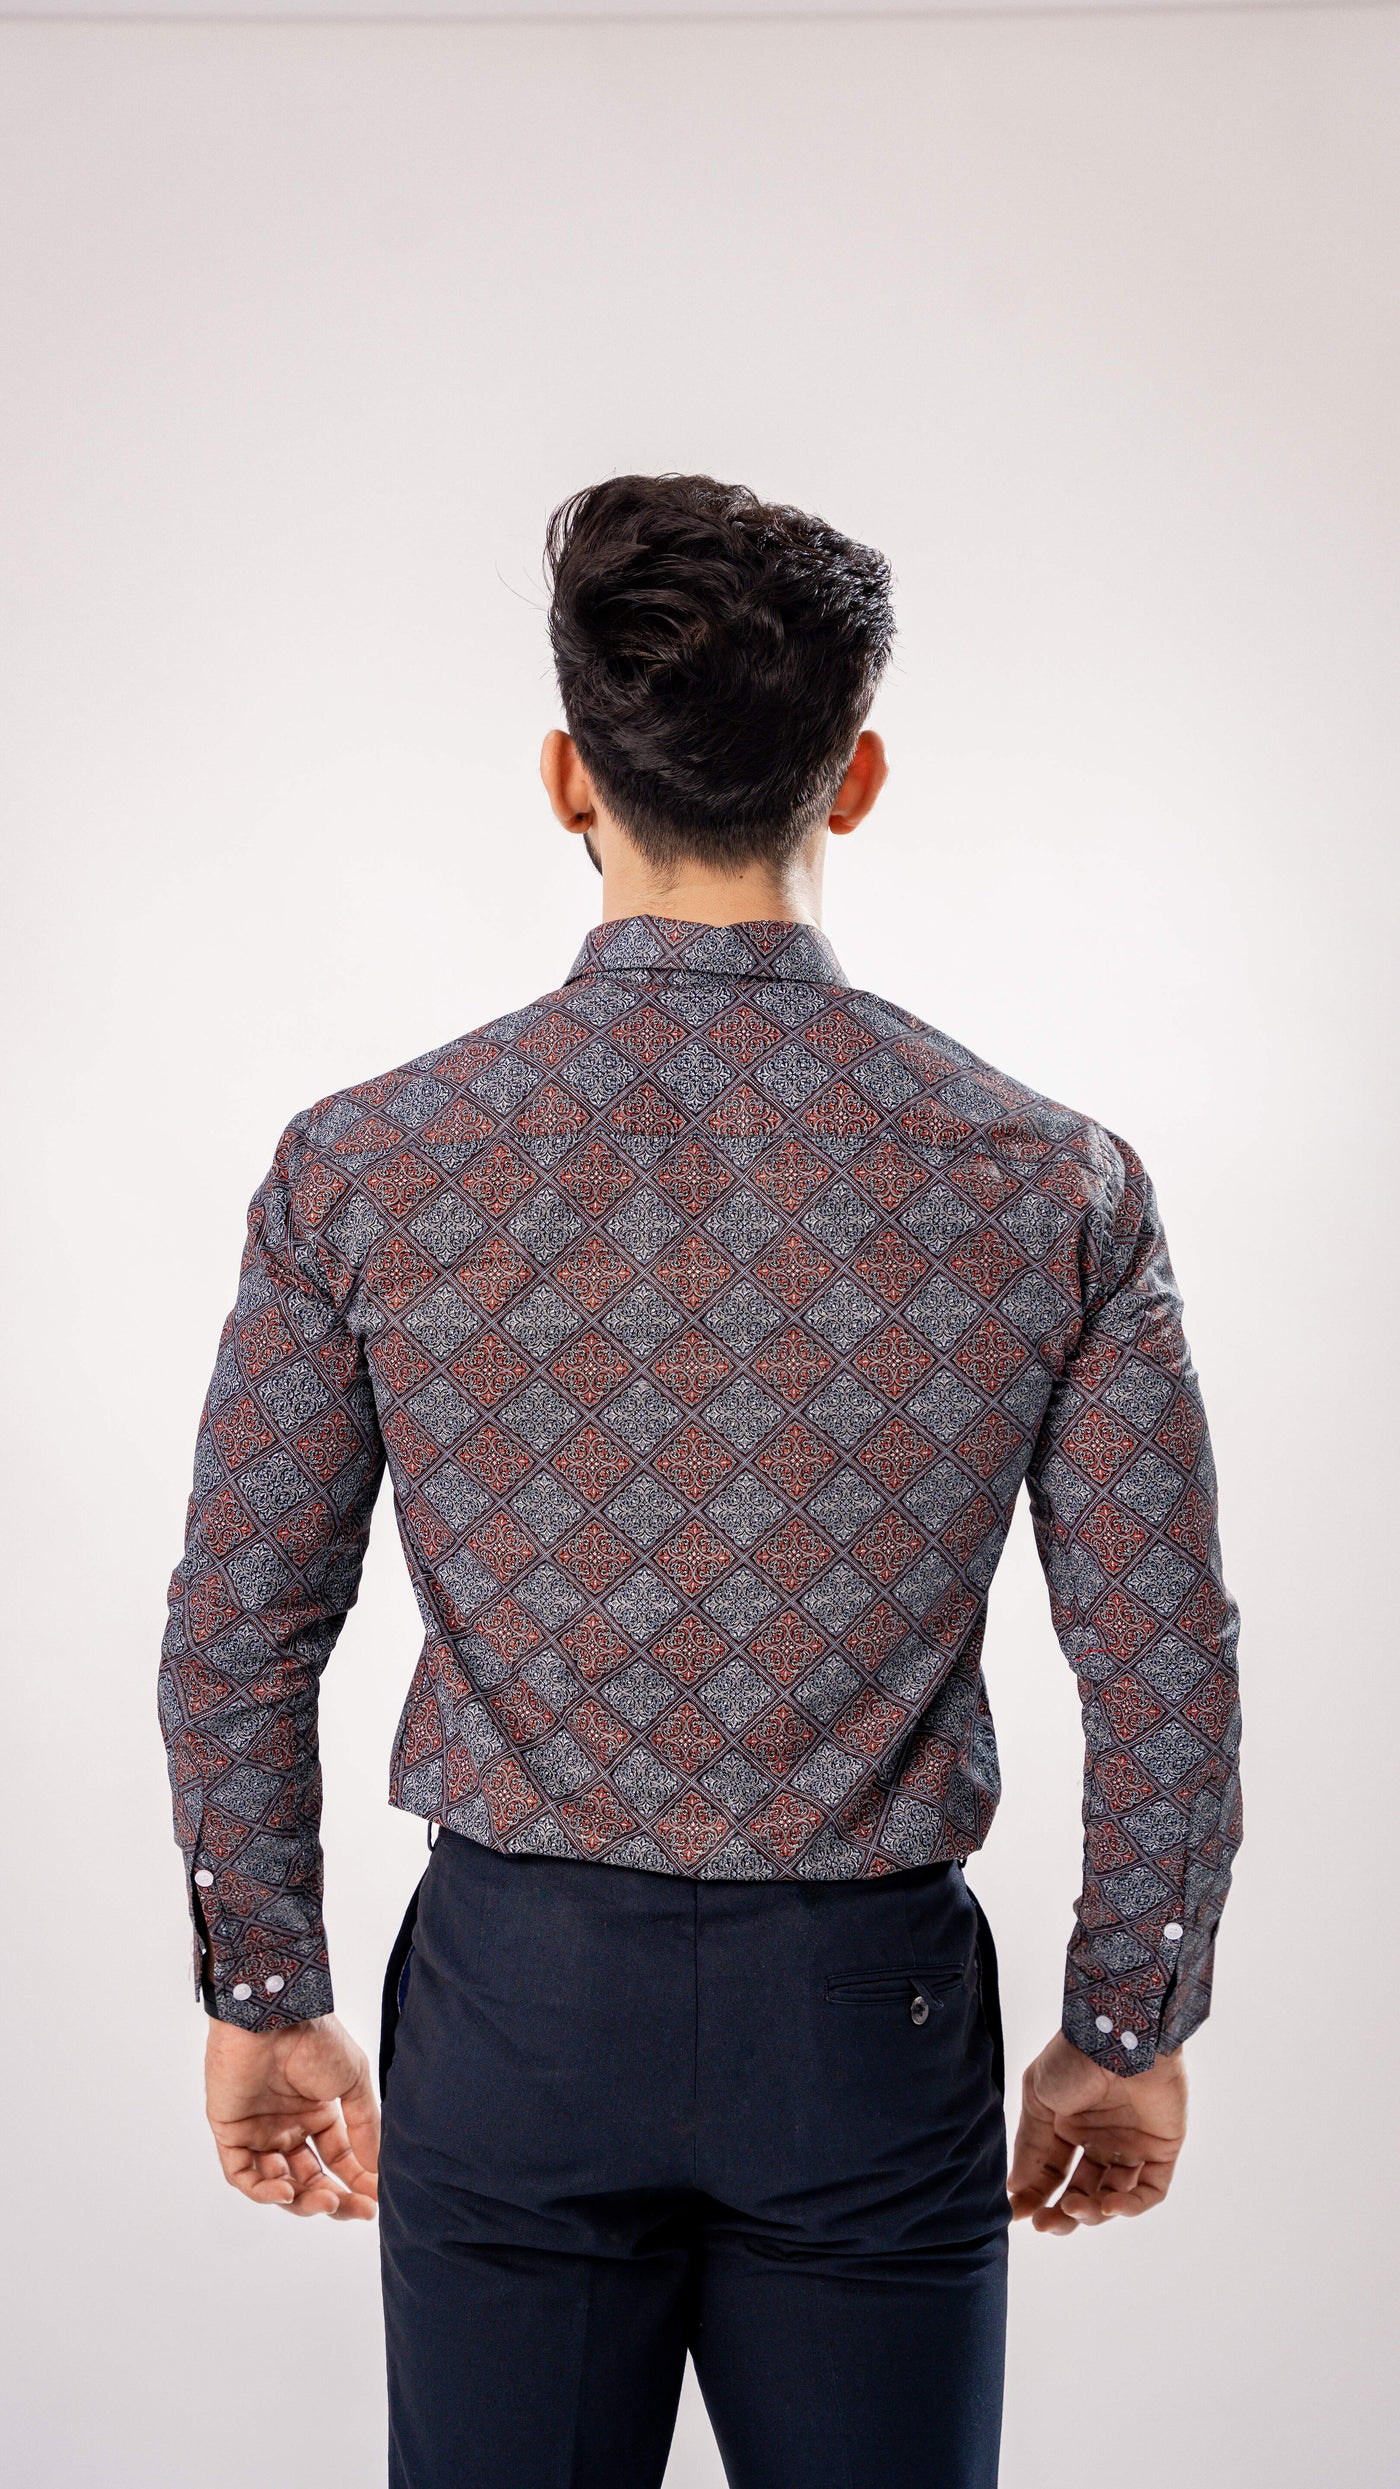 BOYSENBERRY MAROON AND GREY SQURE PRINTED PREMIUM COTTON SHIRT - Royaltail